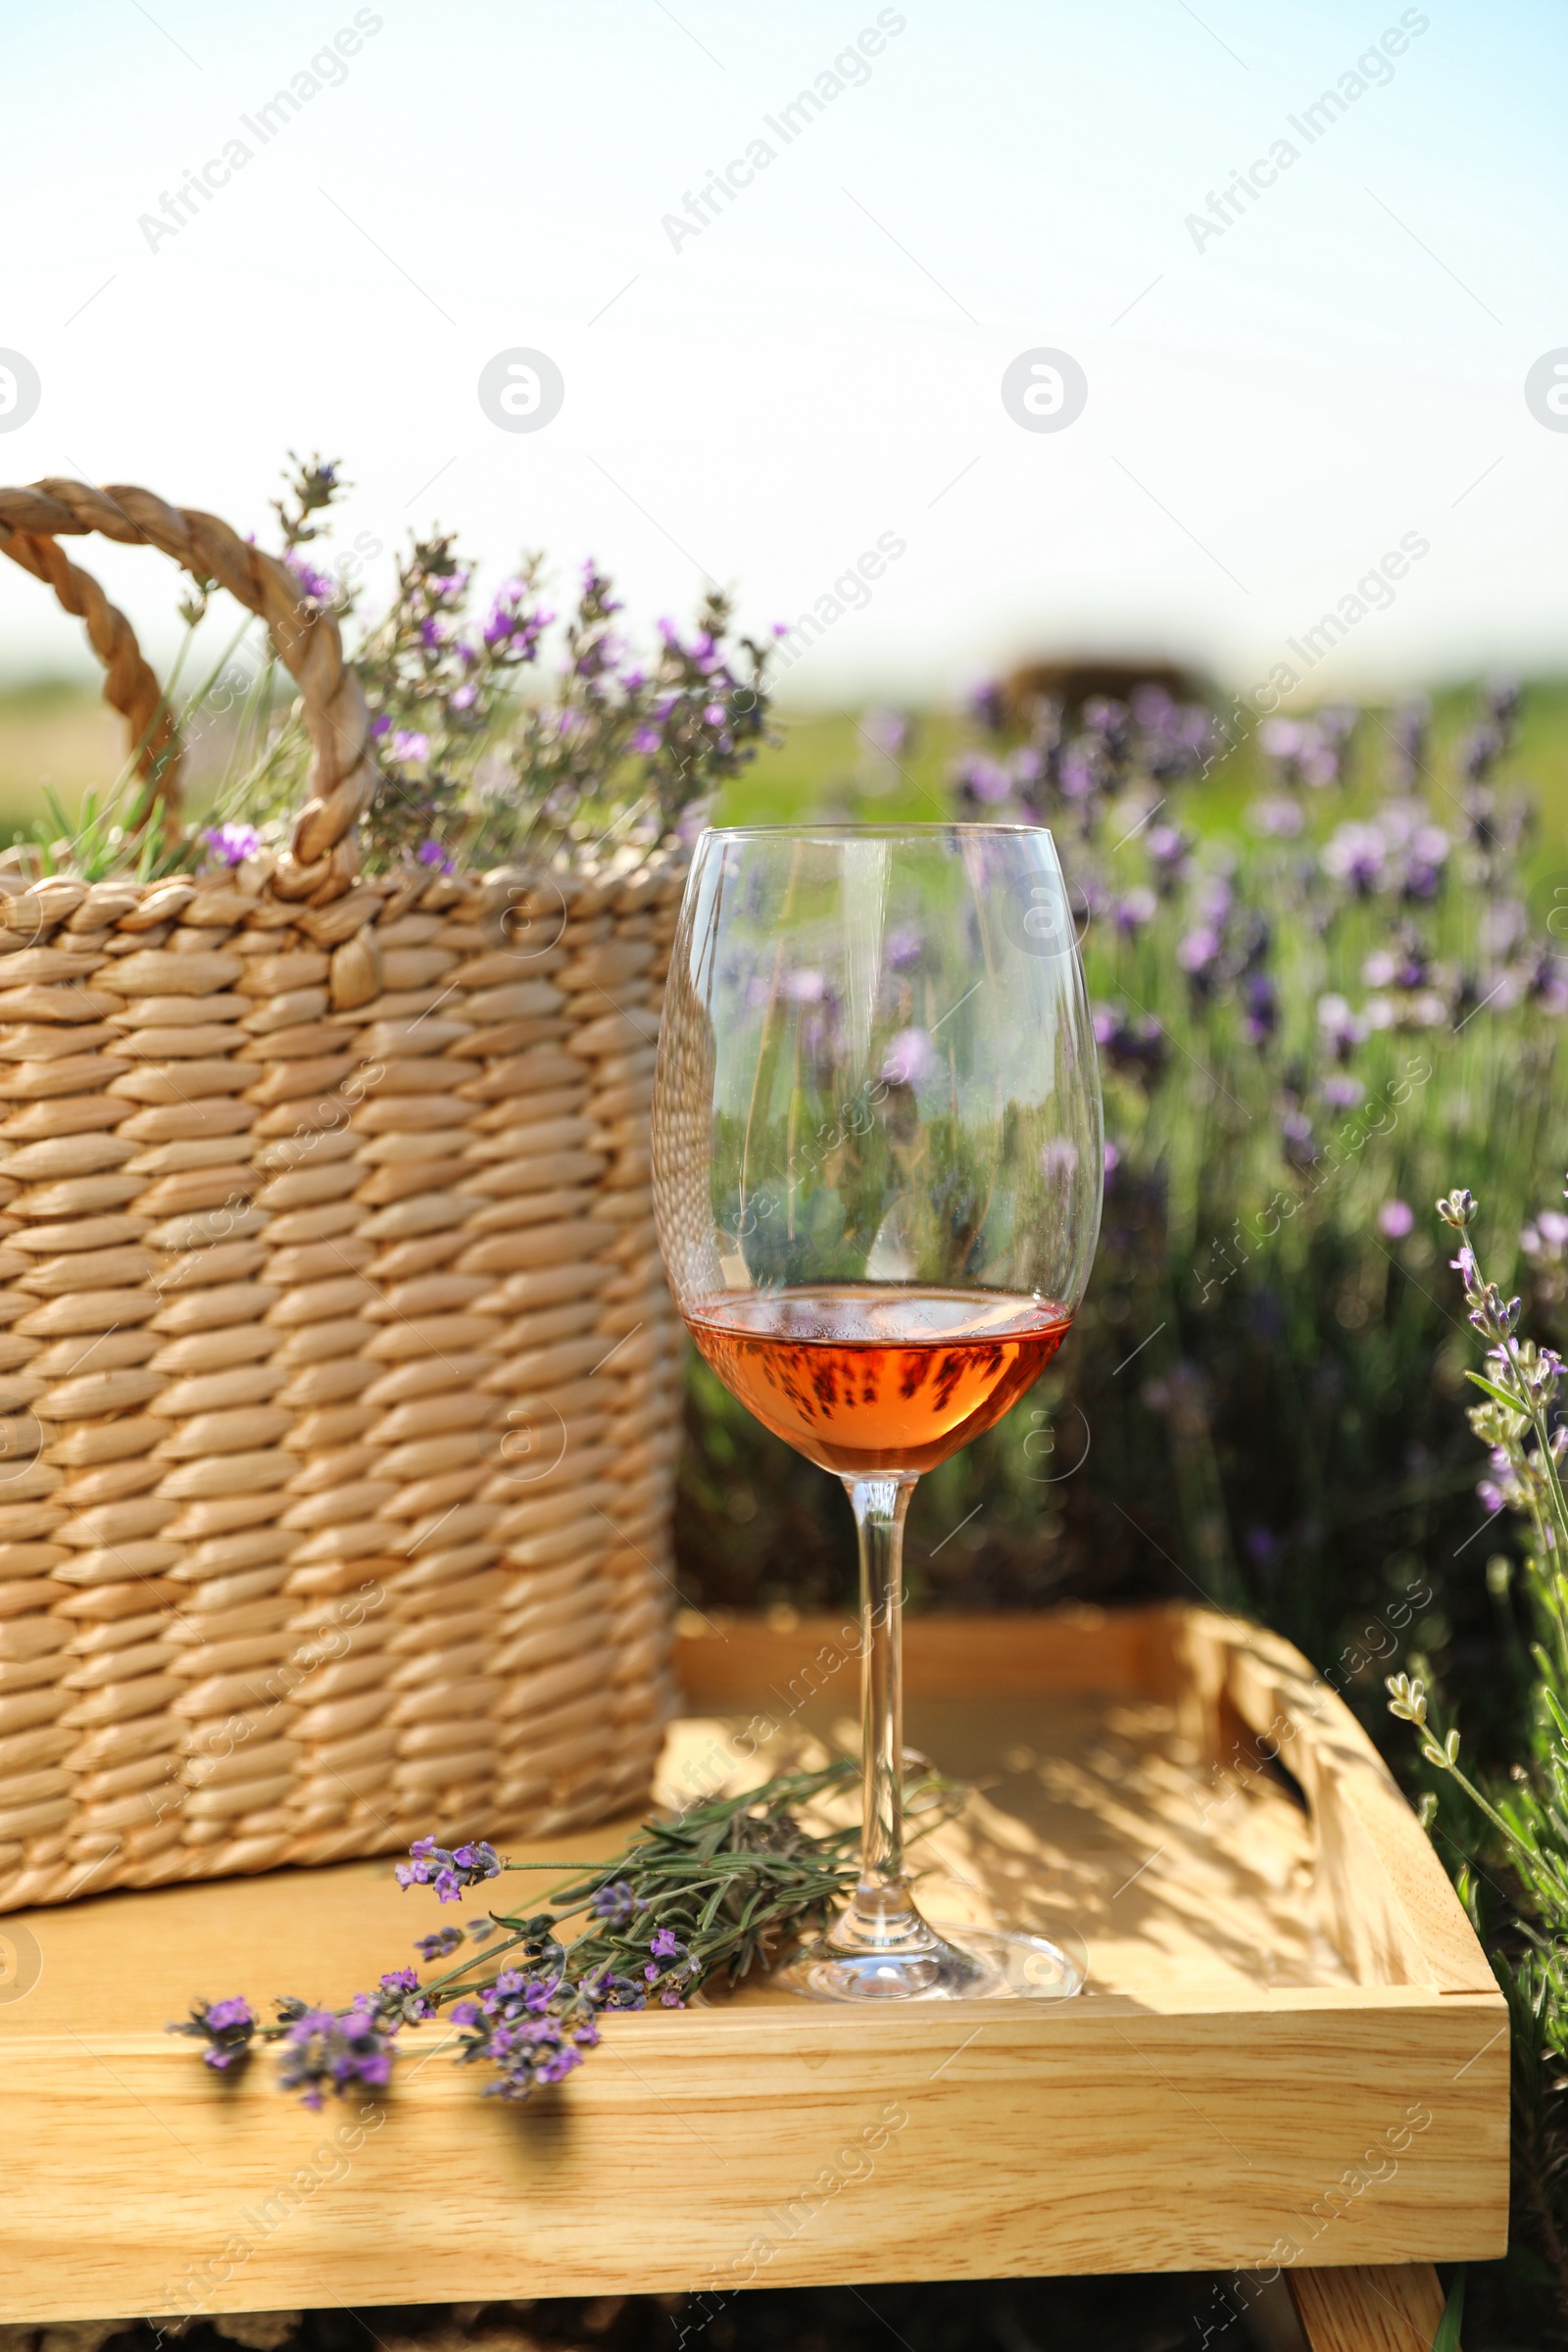 Photo of Glass of wine and wicker bag on wooden tray in lavender field